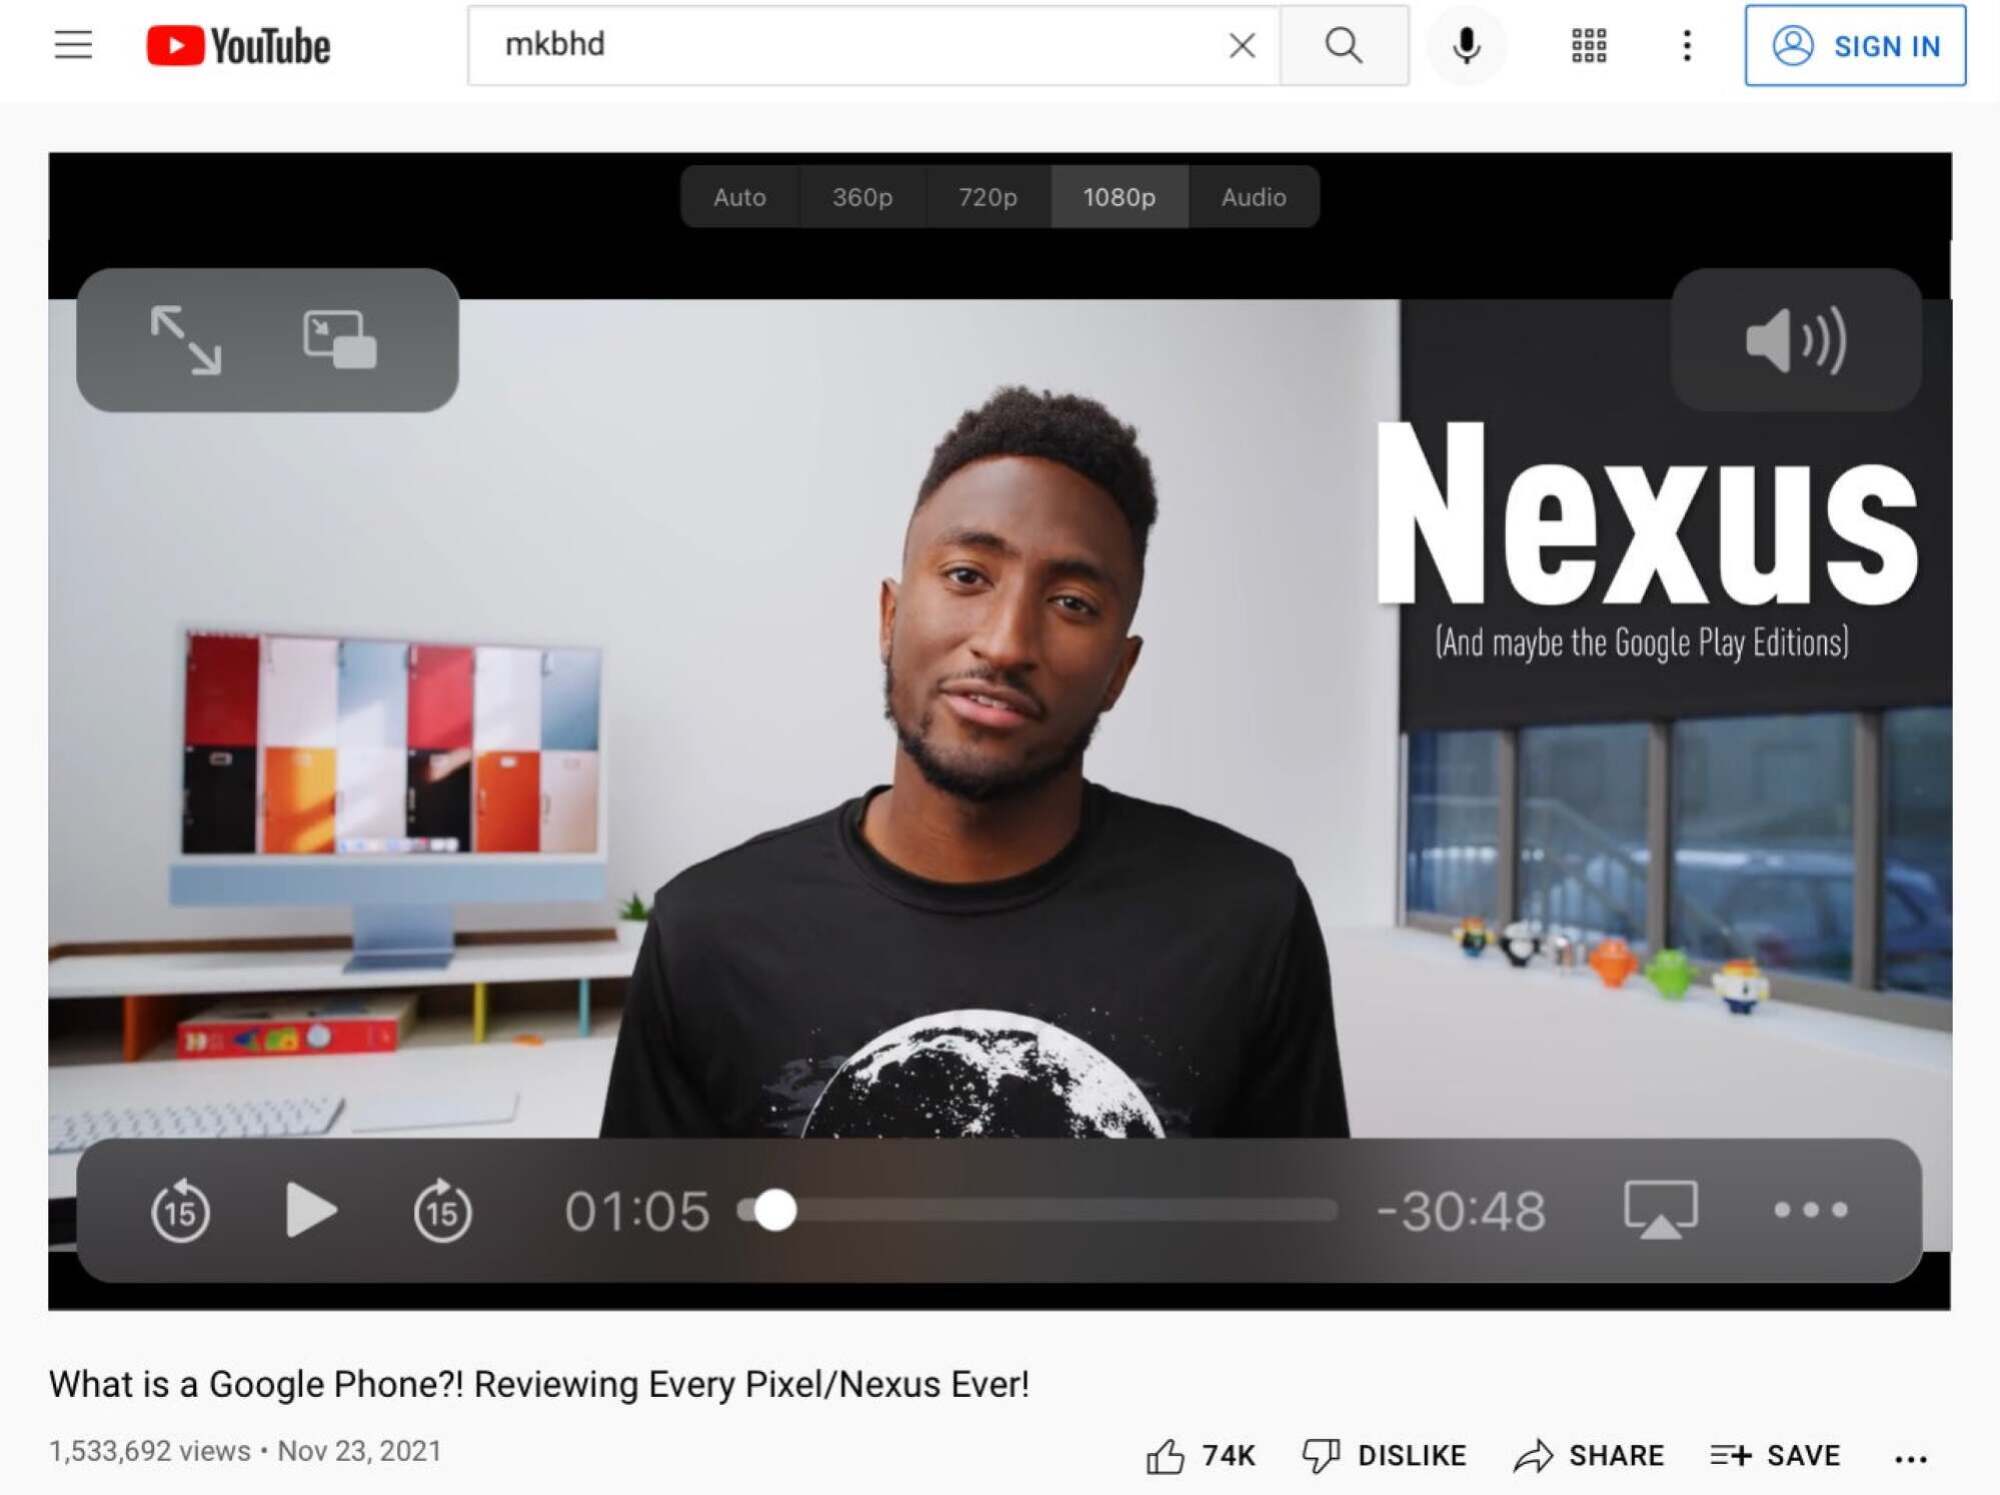 A screenshot of a YouTube video by MKBHD playing in Safari on an iPhone. The player controls are iOS native, thanks to the Vinegar browser extension.